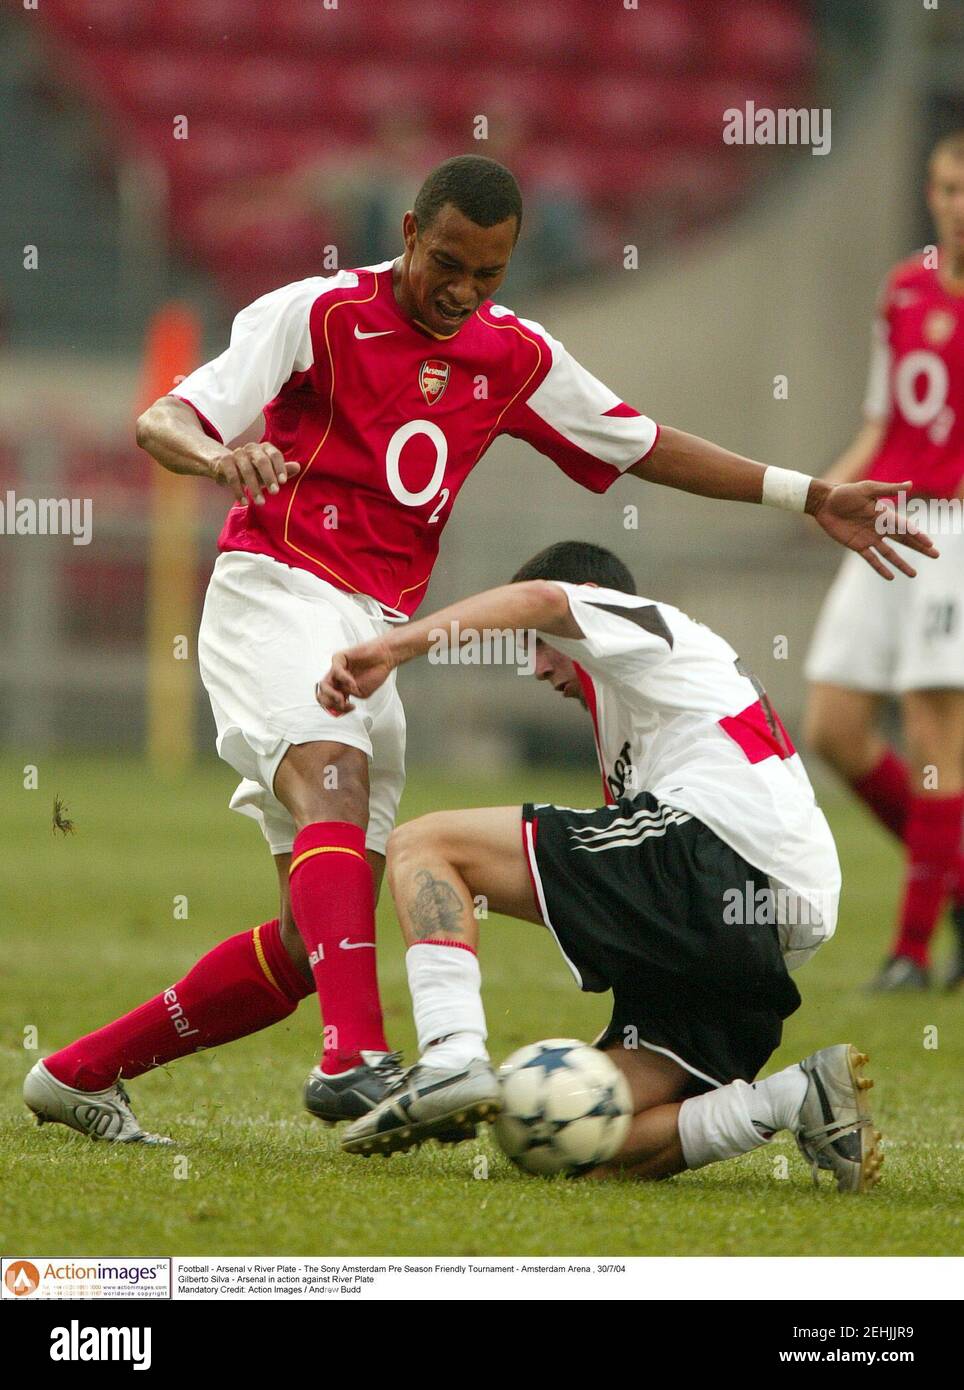 Football - Arsenal v River Plate - The Sony Amsterdam Pre Season Friendly Tournament - Amsterdam Arena , 30/7/04  Gilberto Silva - Arsenal in action against River Plate  Mandatory Credit: Action Images / Andrew Budd Stock Photo